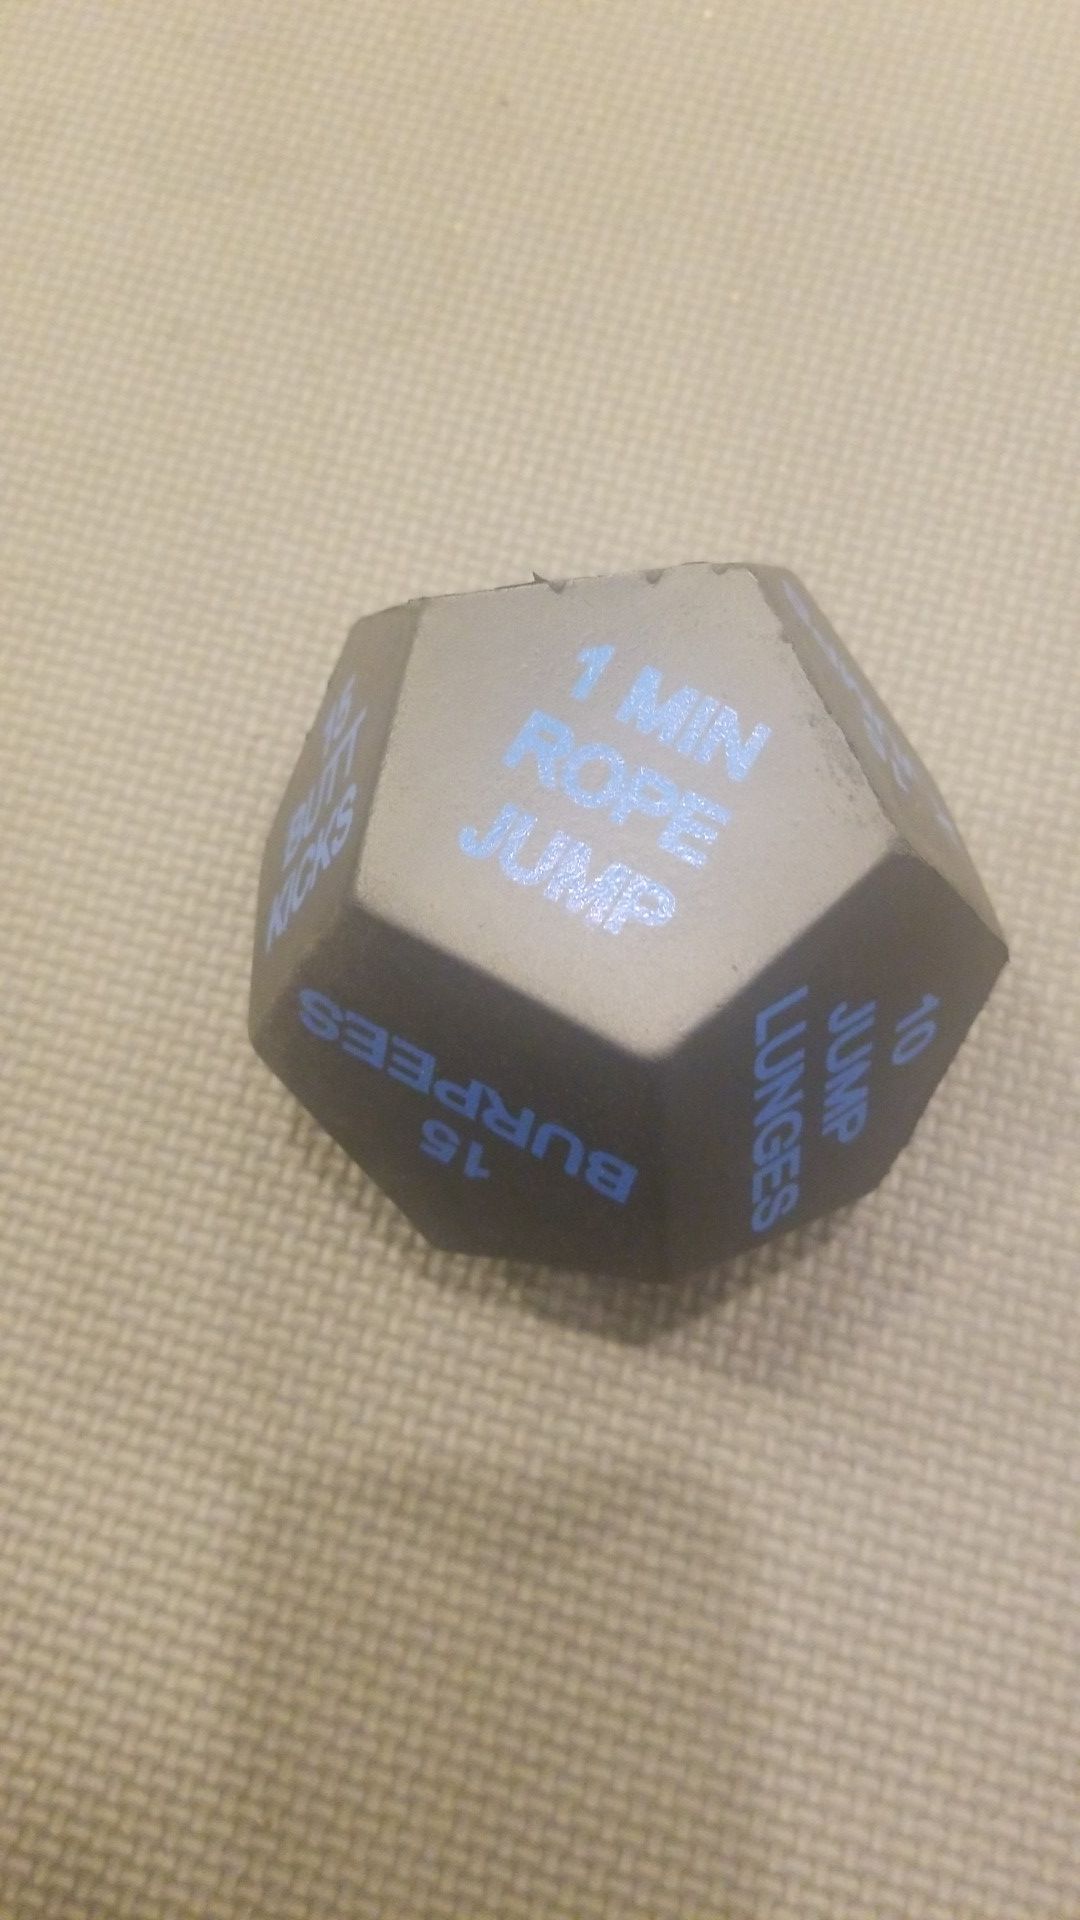 Workout dice